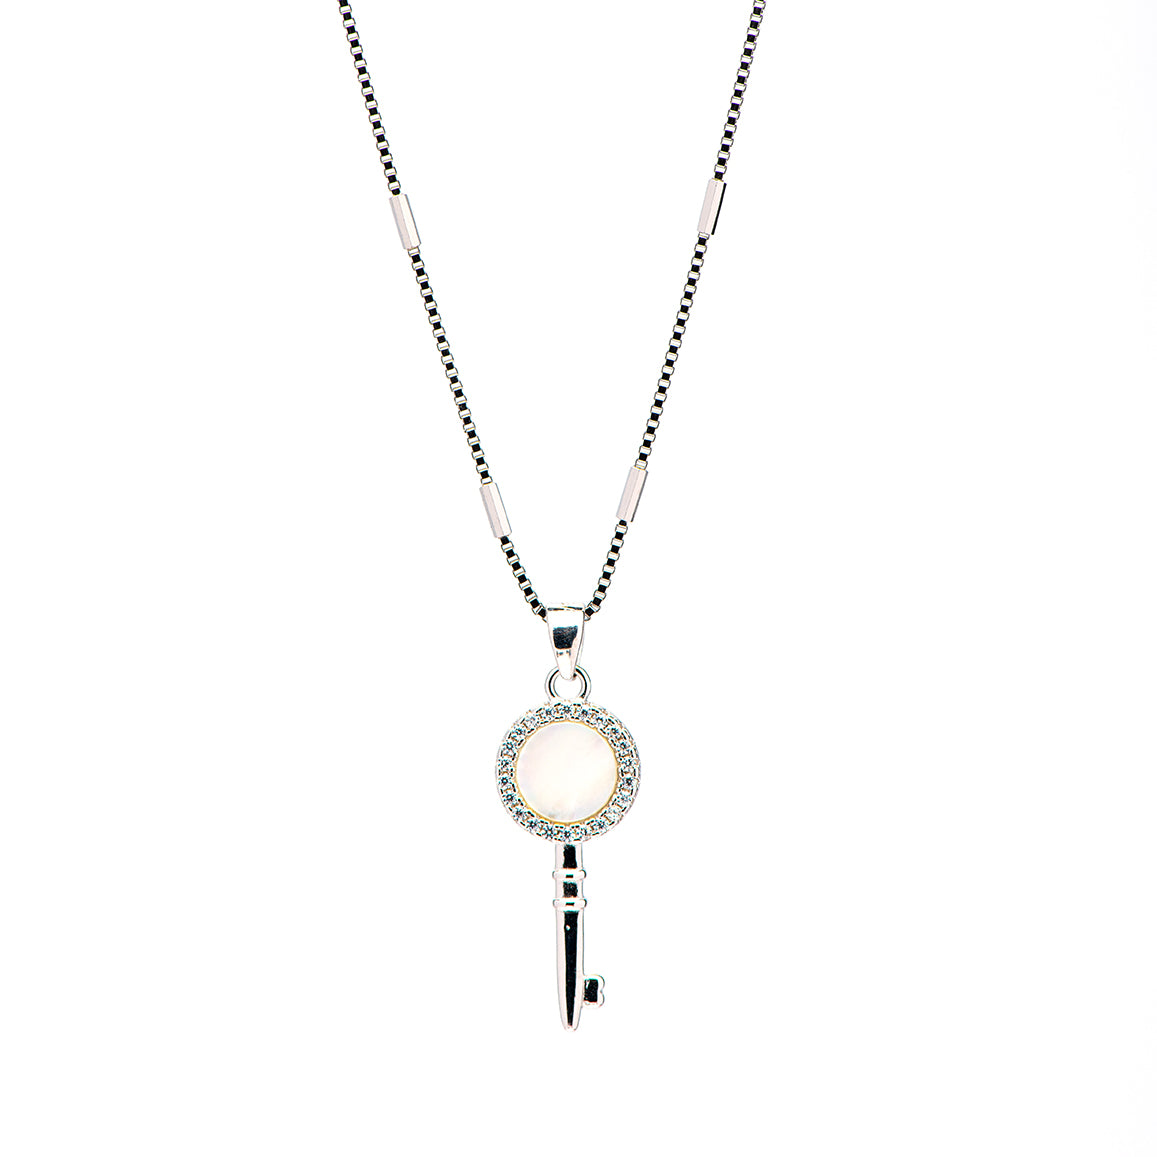 DK-925-451 the key to success with mother of pearl